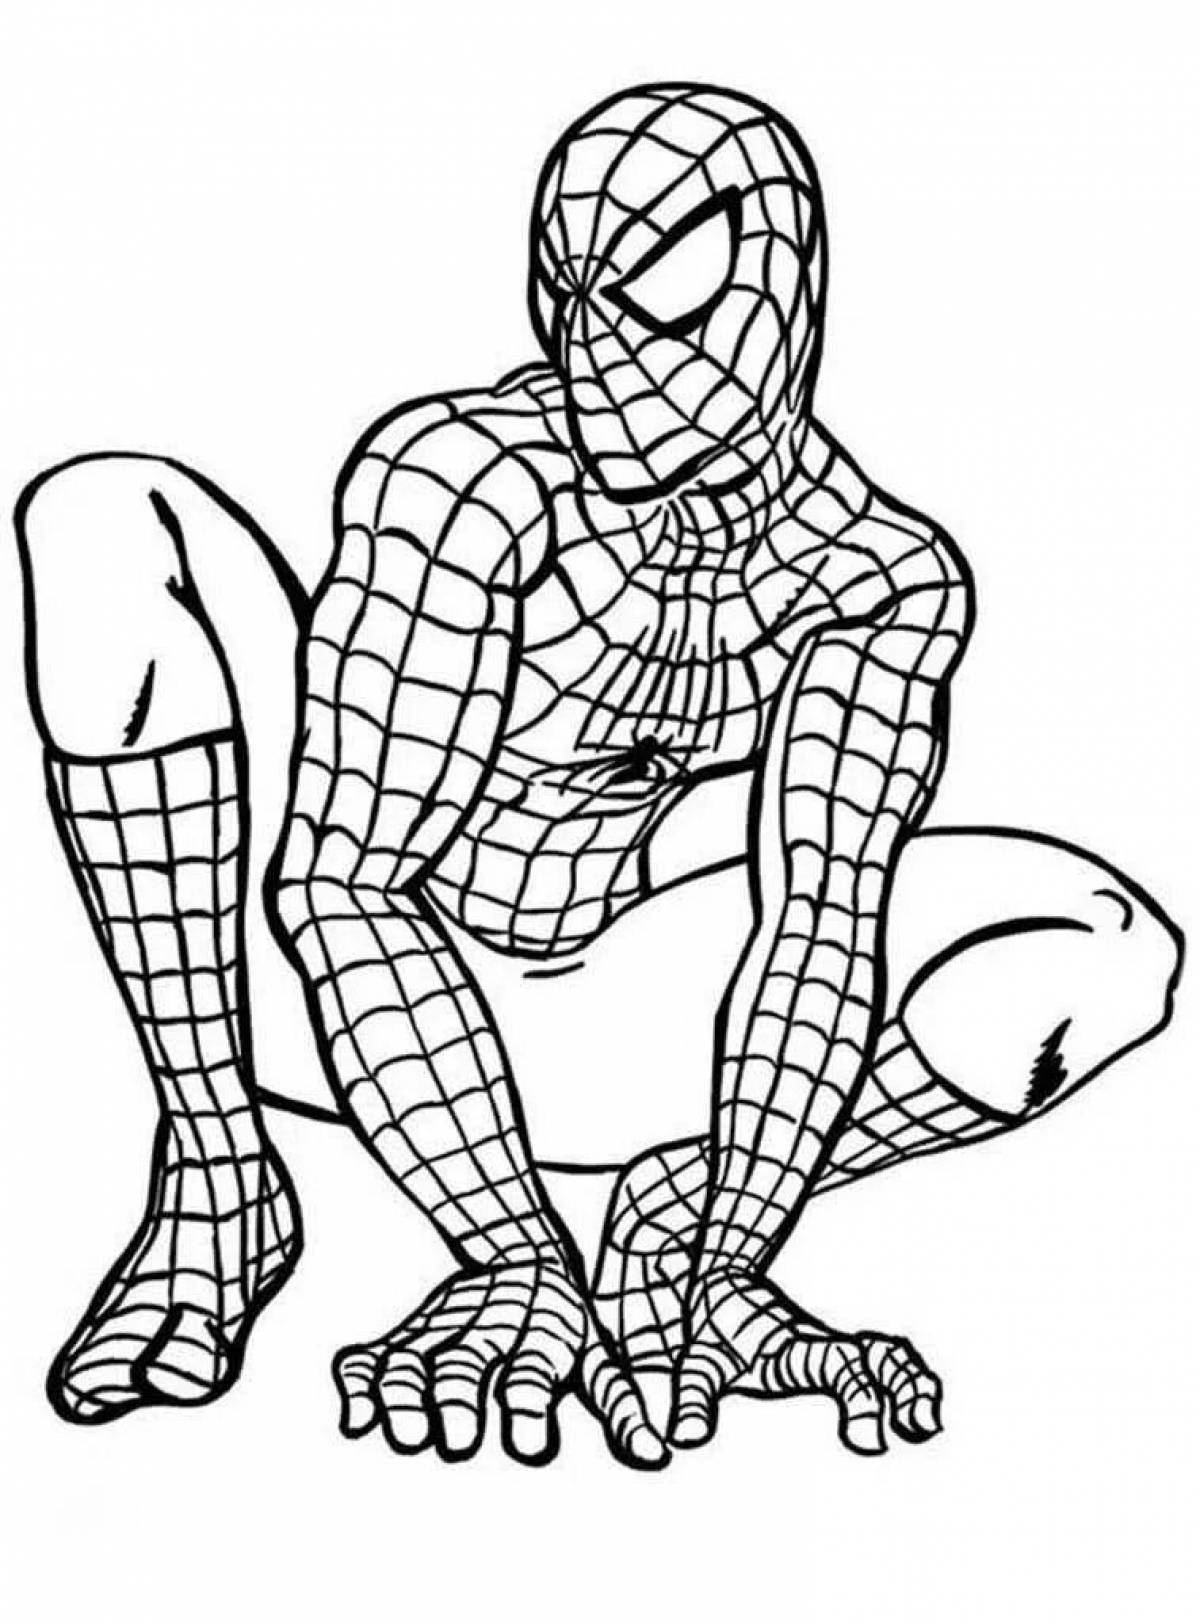 Gorgeous spiderman coloring book